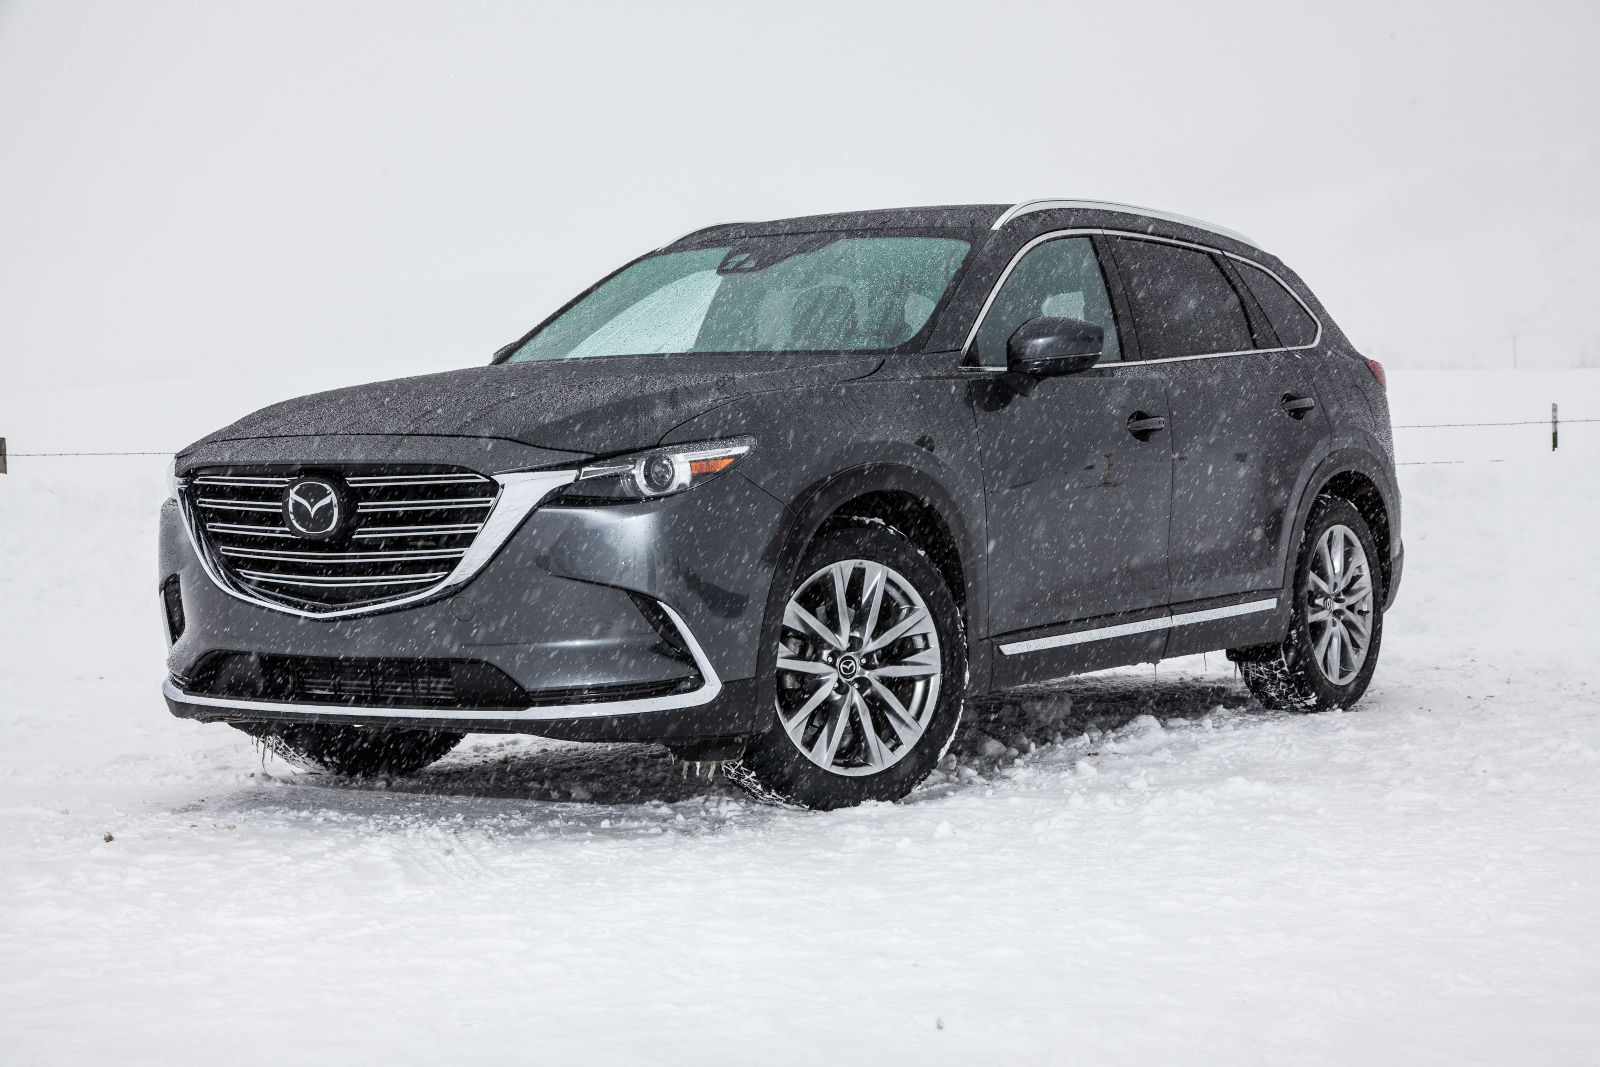 Winter Tire Guide: Everything You Need to Know before Buying Winter Tires for Your Mazda